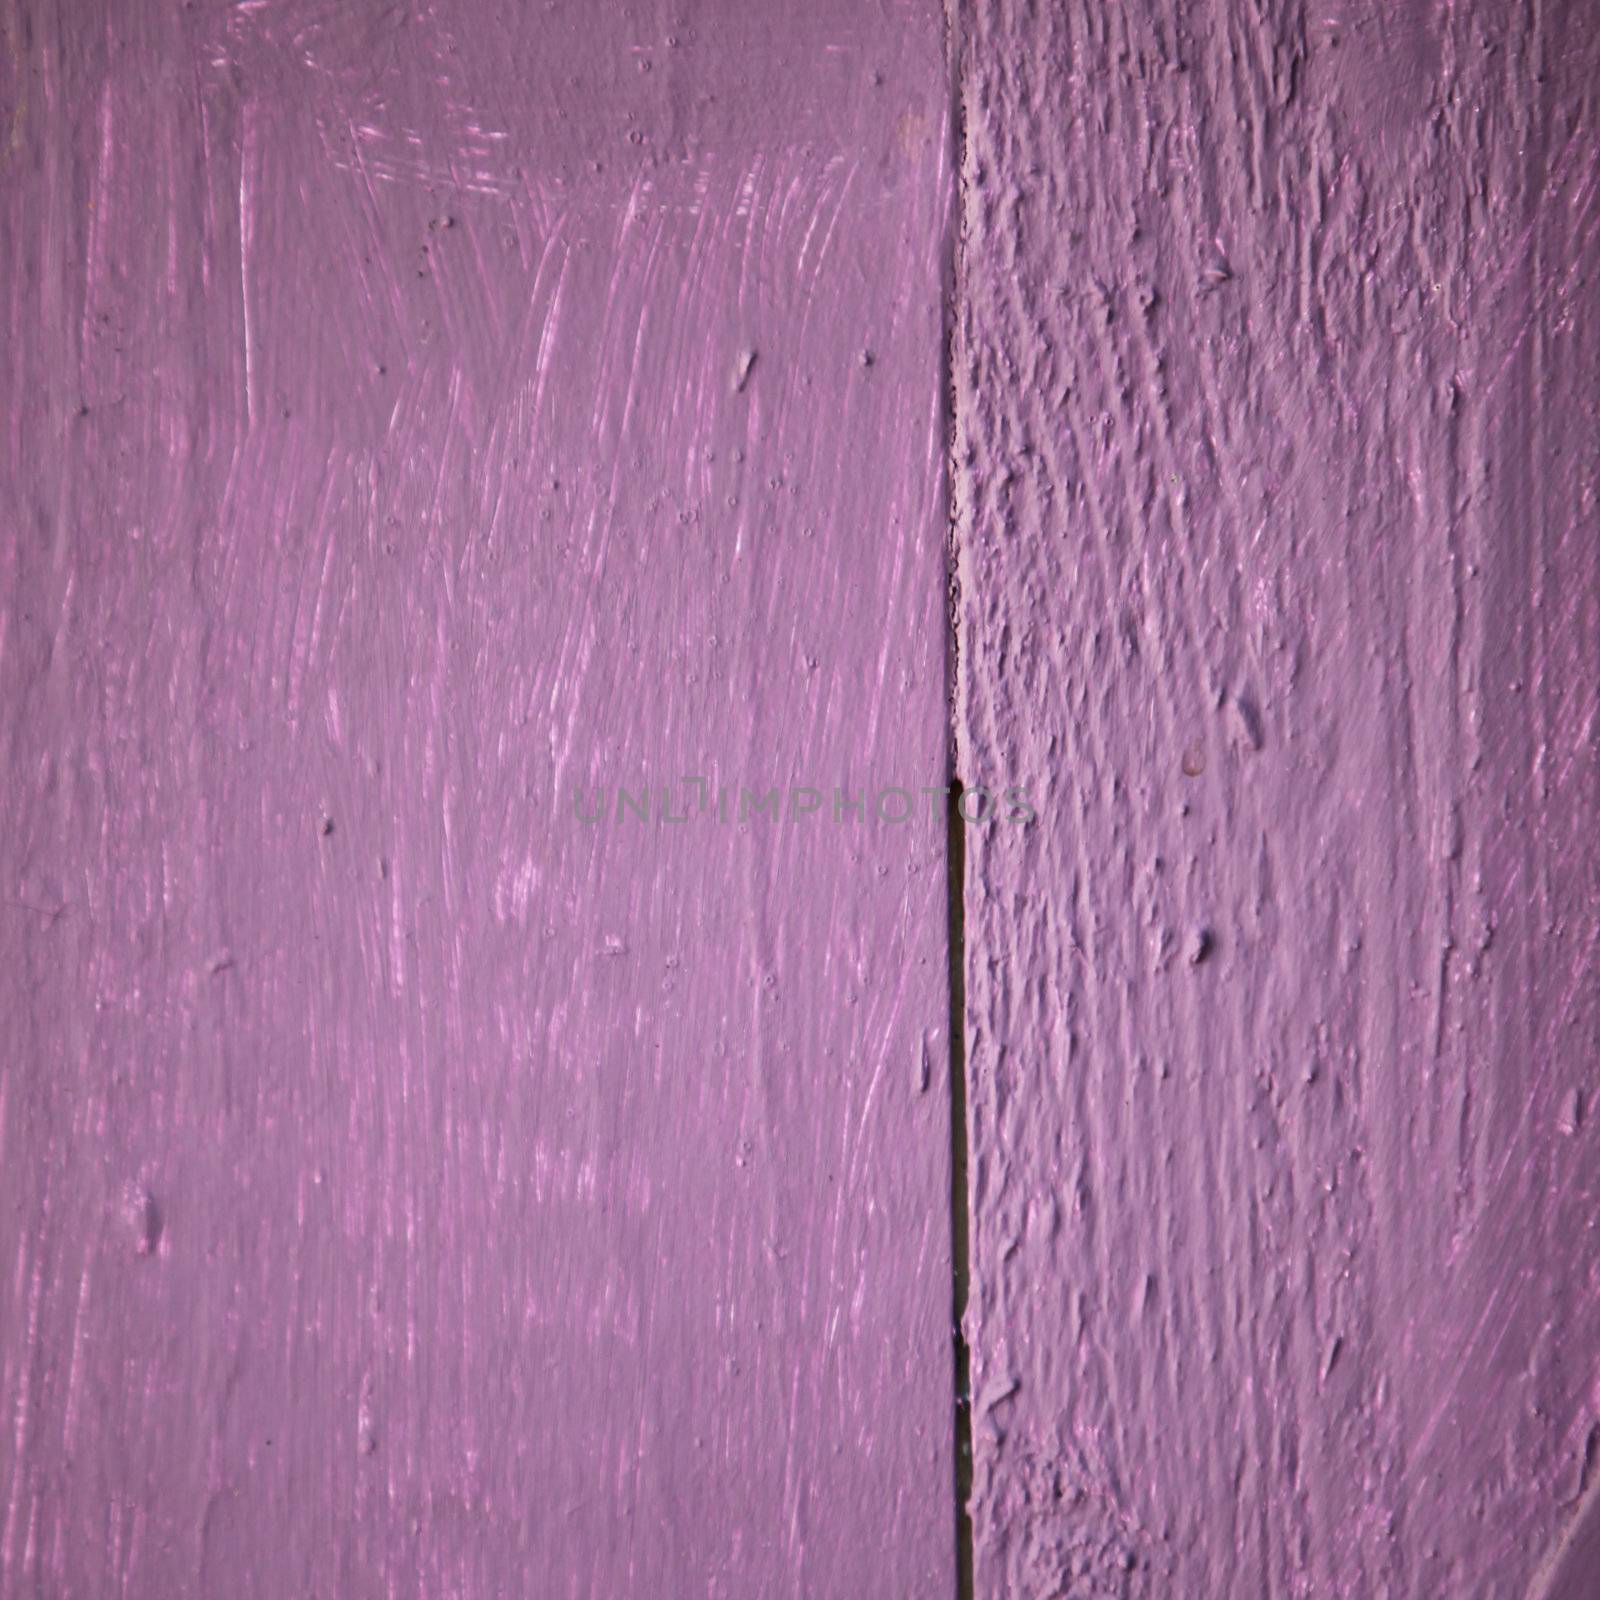 Background texture of painted purple wooden planks with a rough surface and woodgrain detail, square format